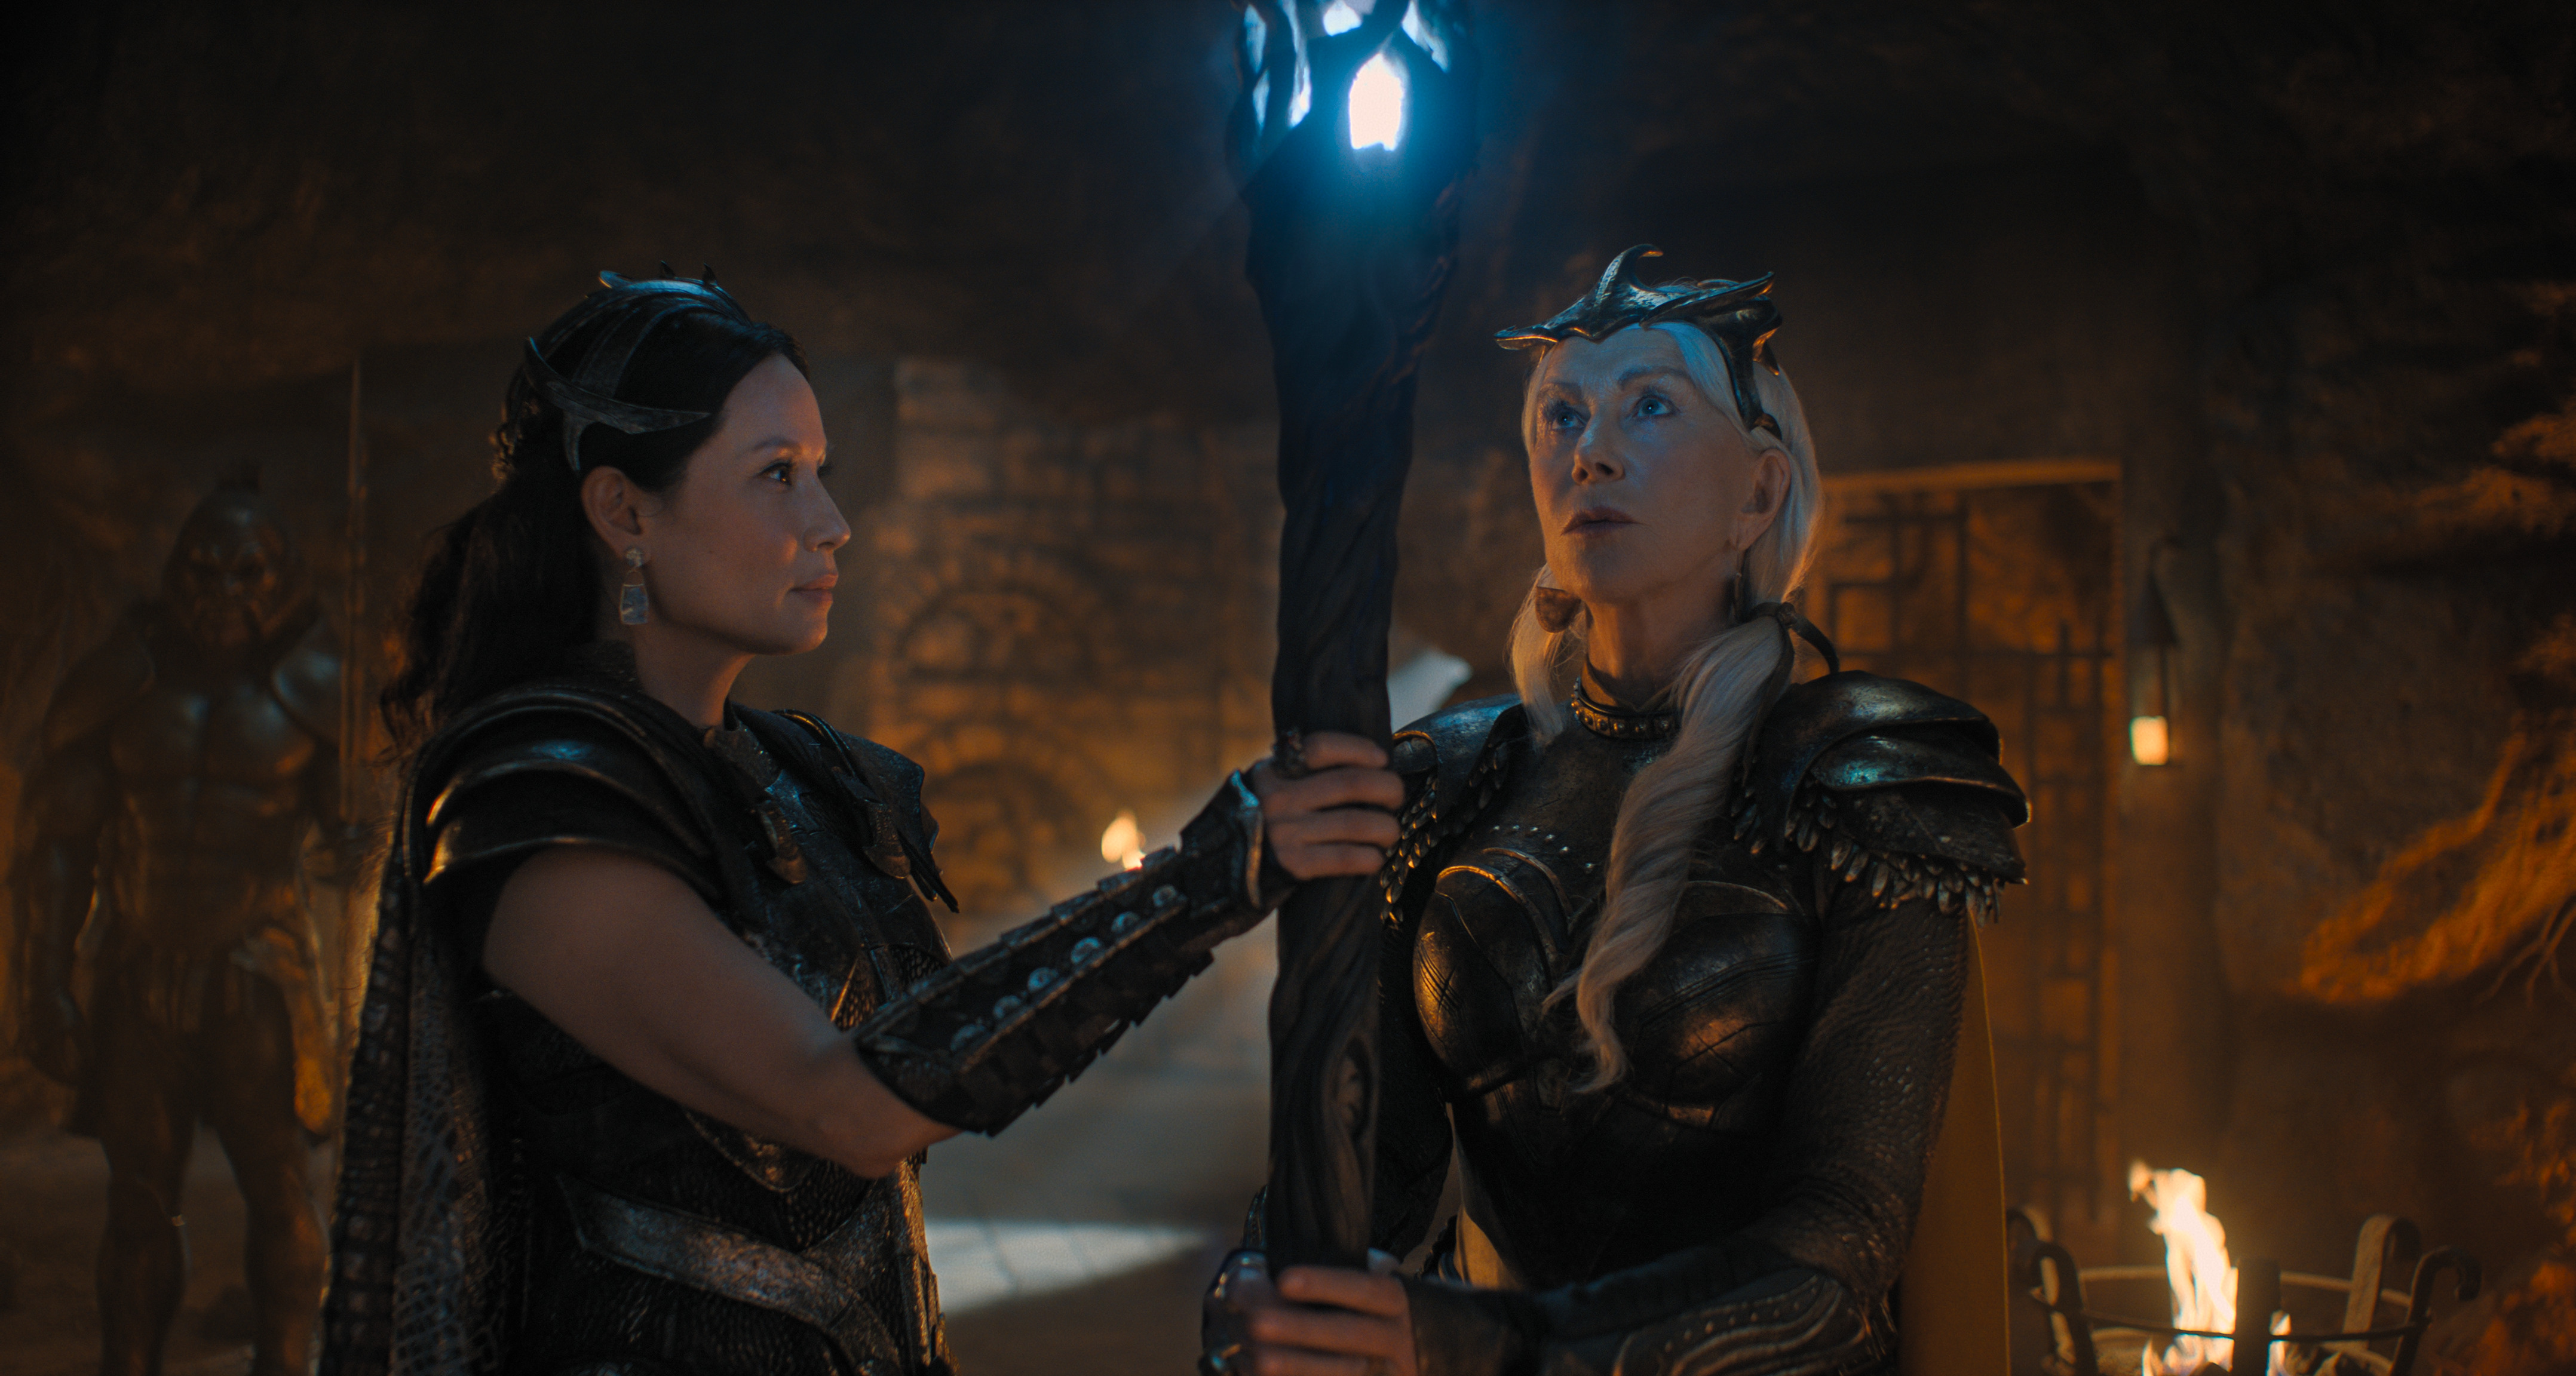 Helen Mirren and Lucy Liu in 'Shazam! Fury of the Gods'. Image: Warner Bros. Pictures